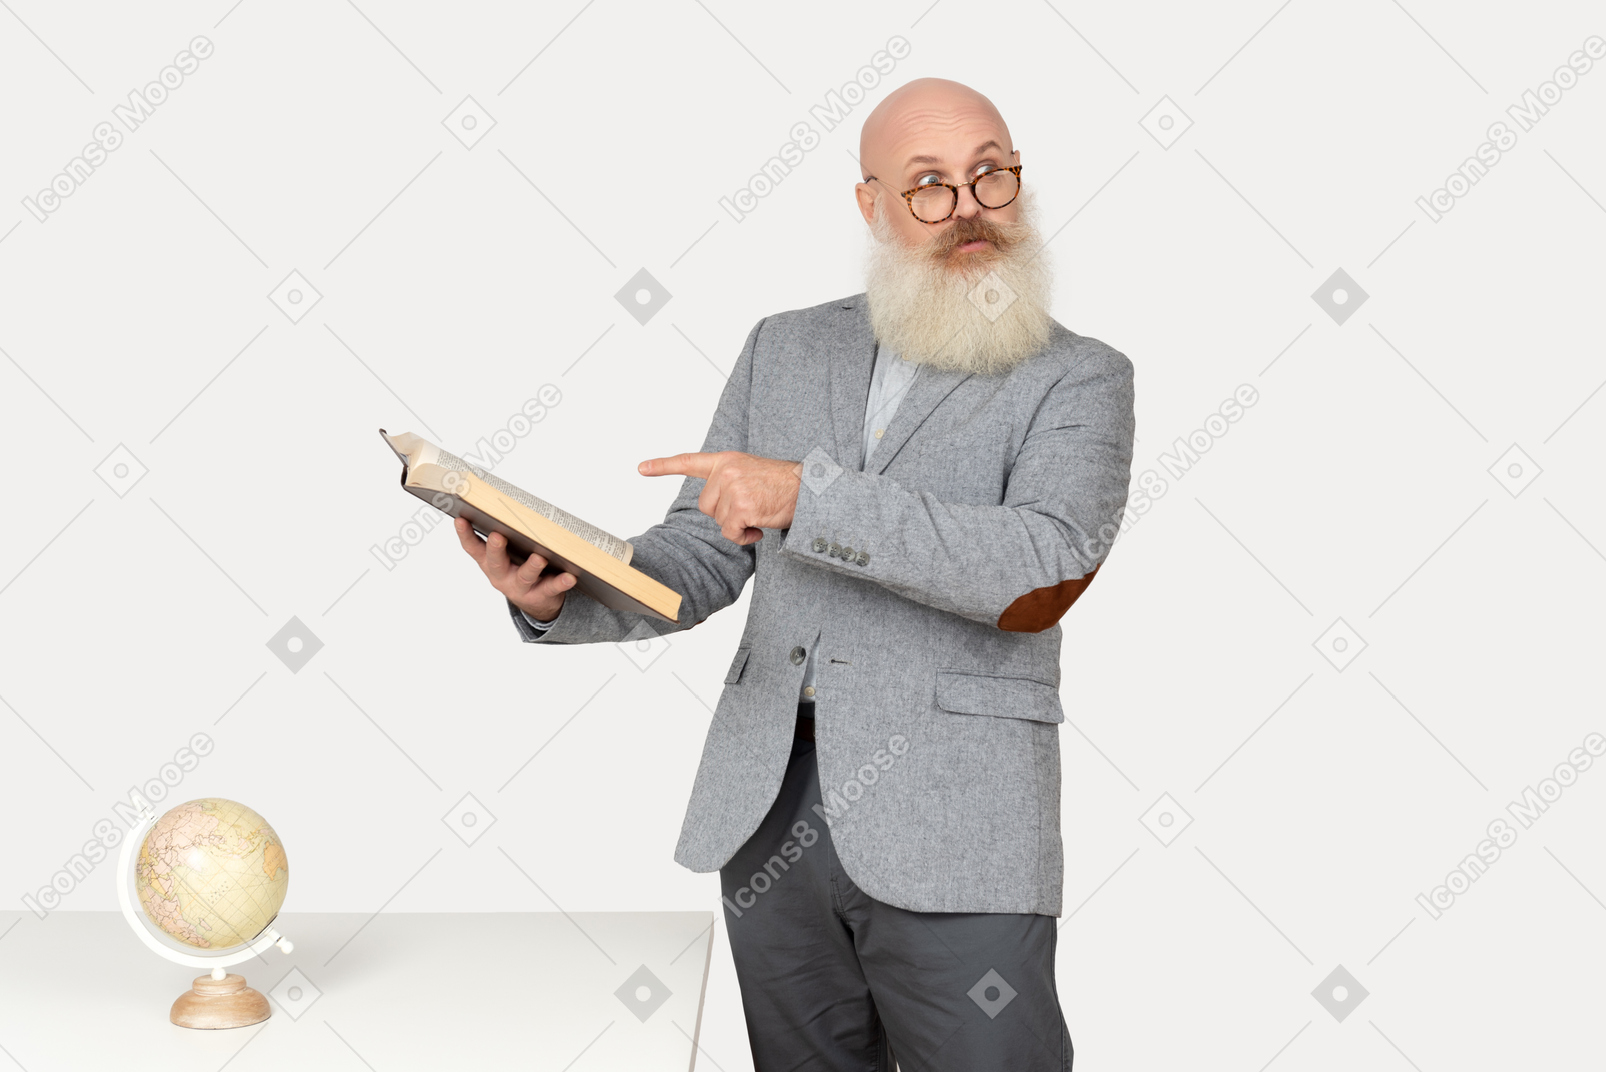 Old professor holding a book and seems like talking to someone